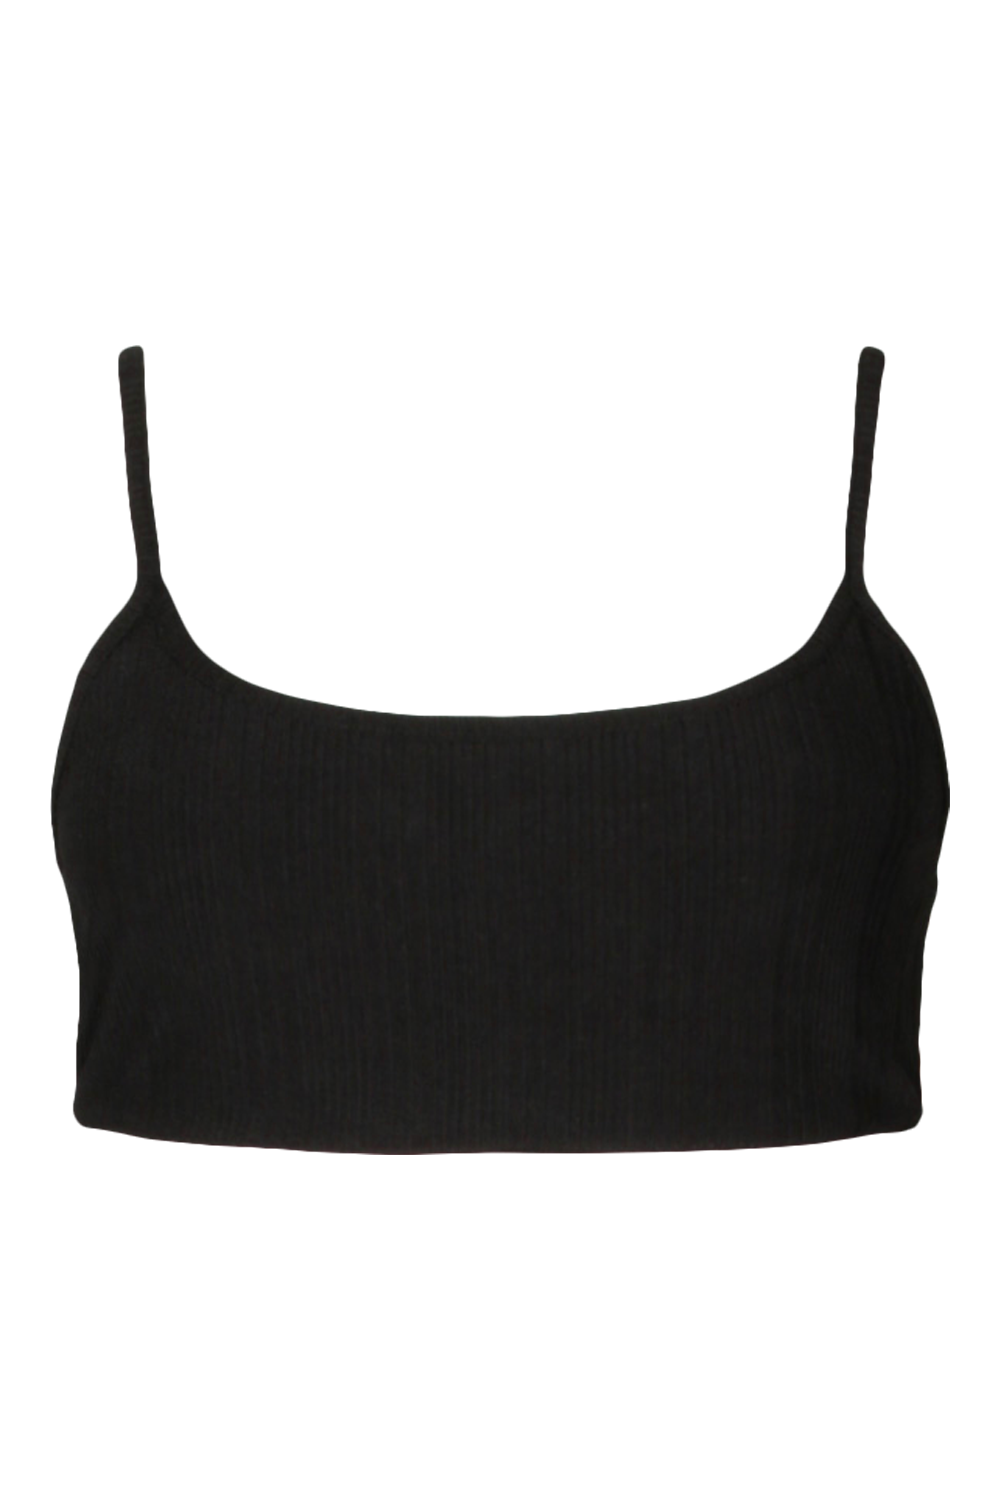 Plus Size Black Seamless Padded Crop Bralette Top Yours, 46% OFF